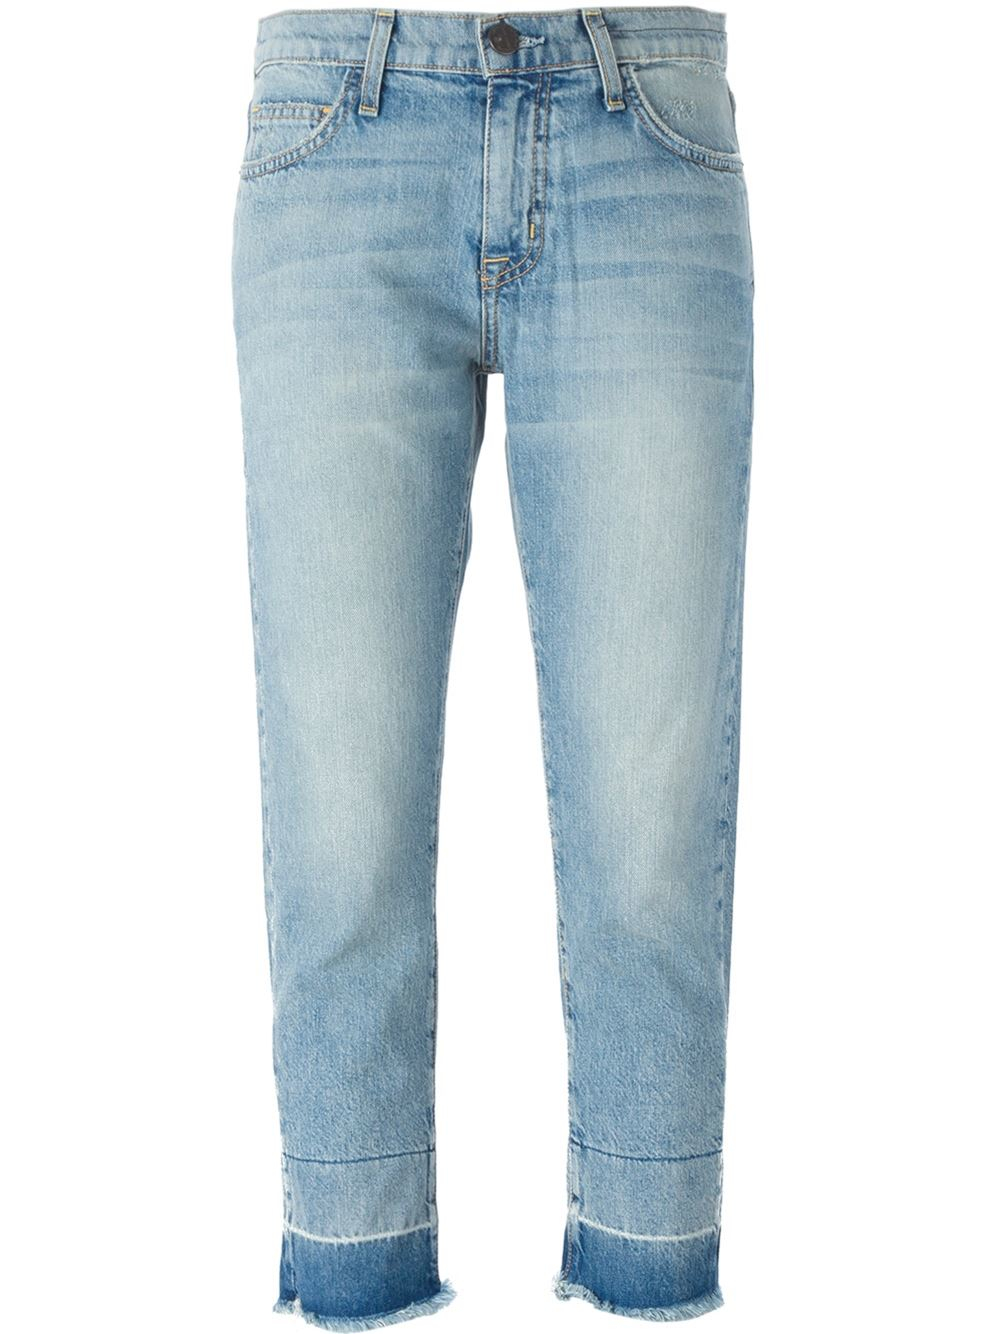 Lyst - Current/Elliott Frayed Edges Cropped Jeans in Blue